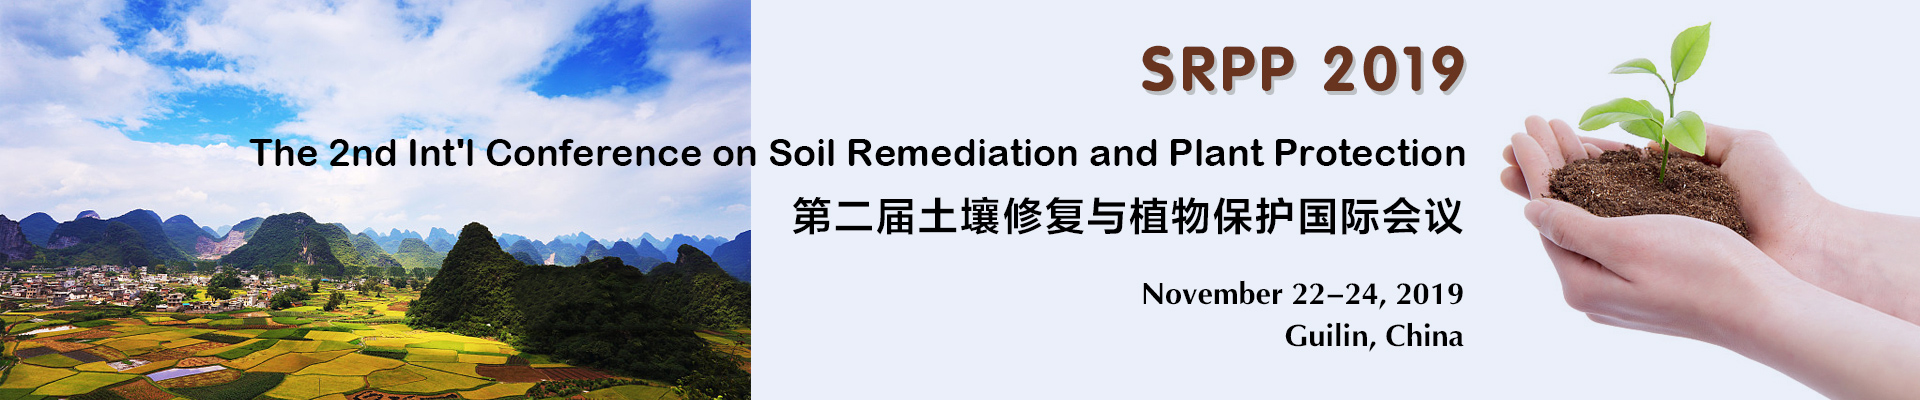 The 2nd Int'l Conference on Soil Remediation and Plant Protection (SRPP 2019), Guilin, Guangxi, China